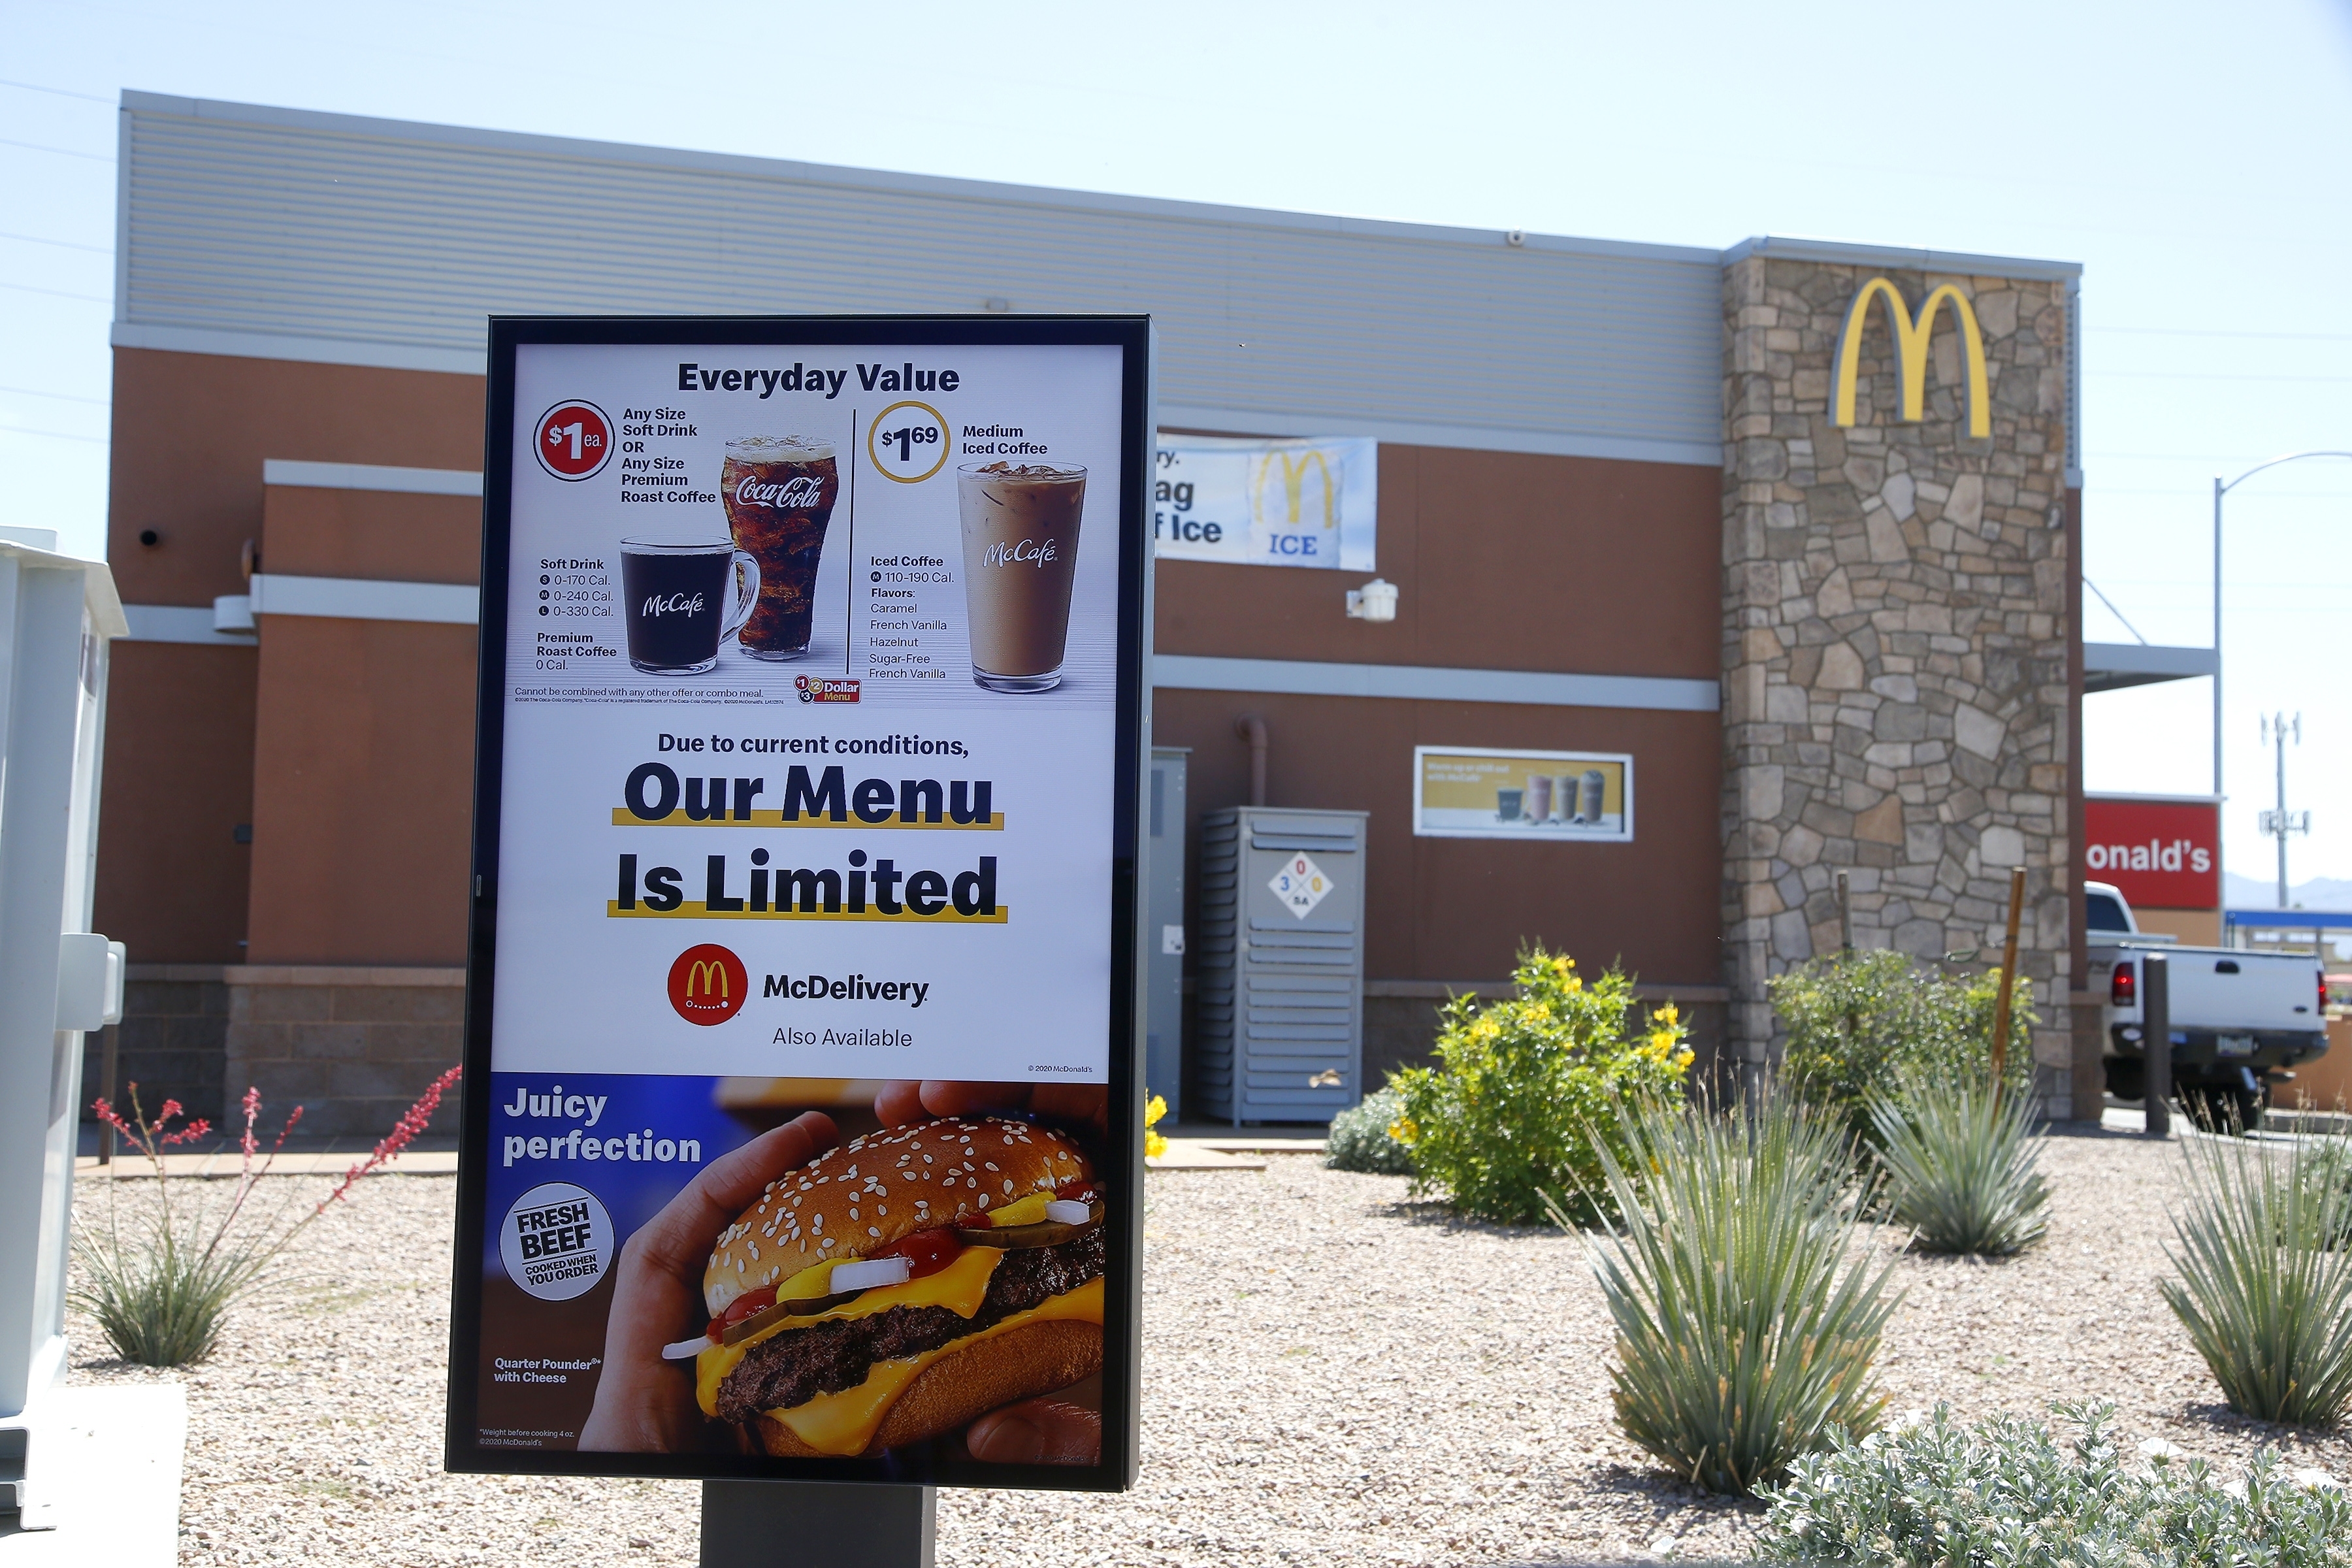 McDonald's Dollar Menu  Everything You Need To Know - Restaurant